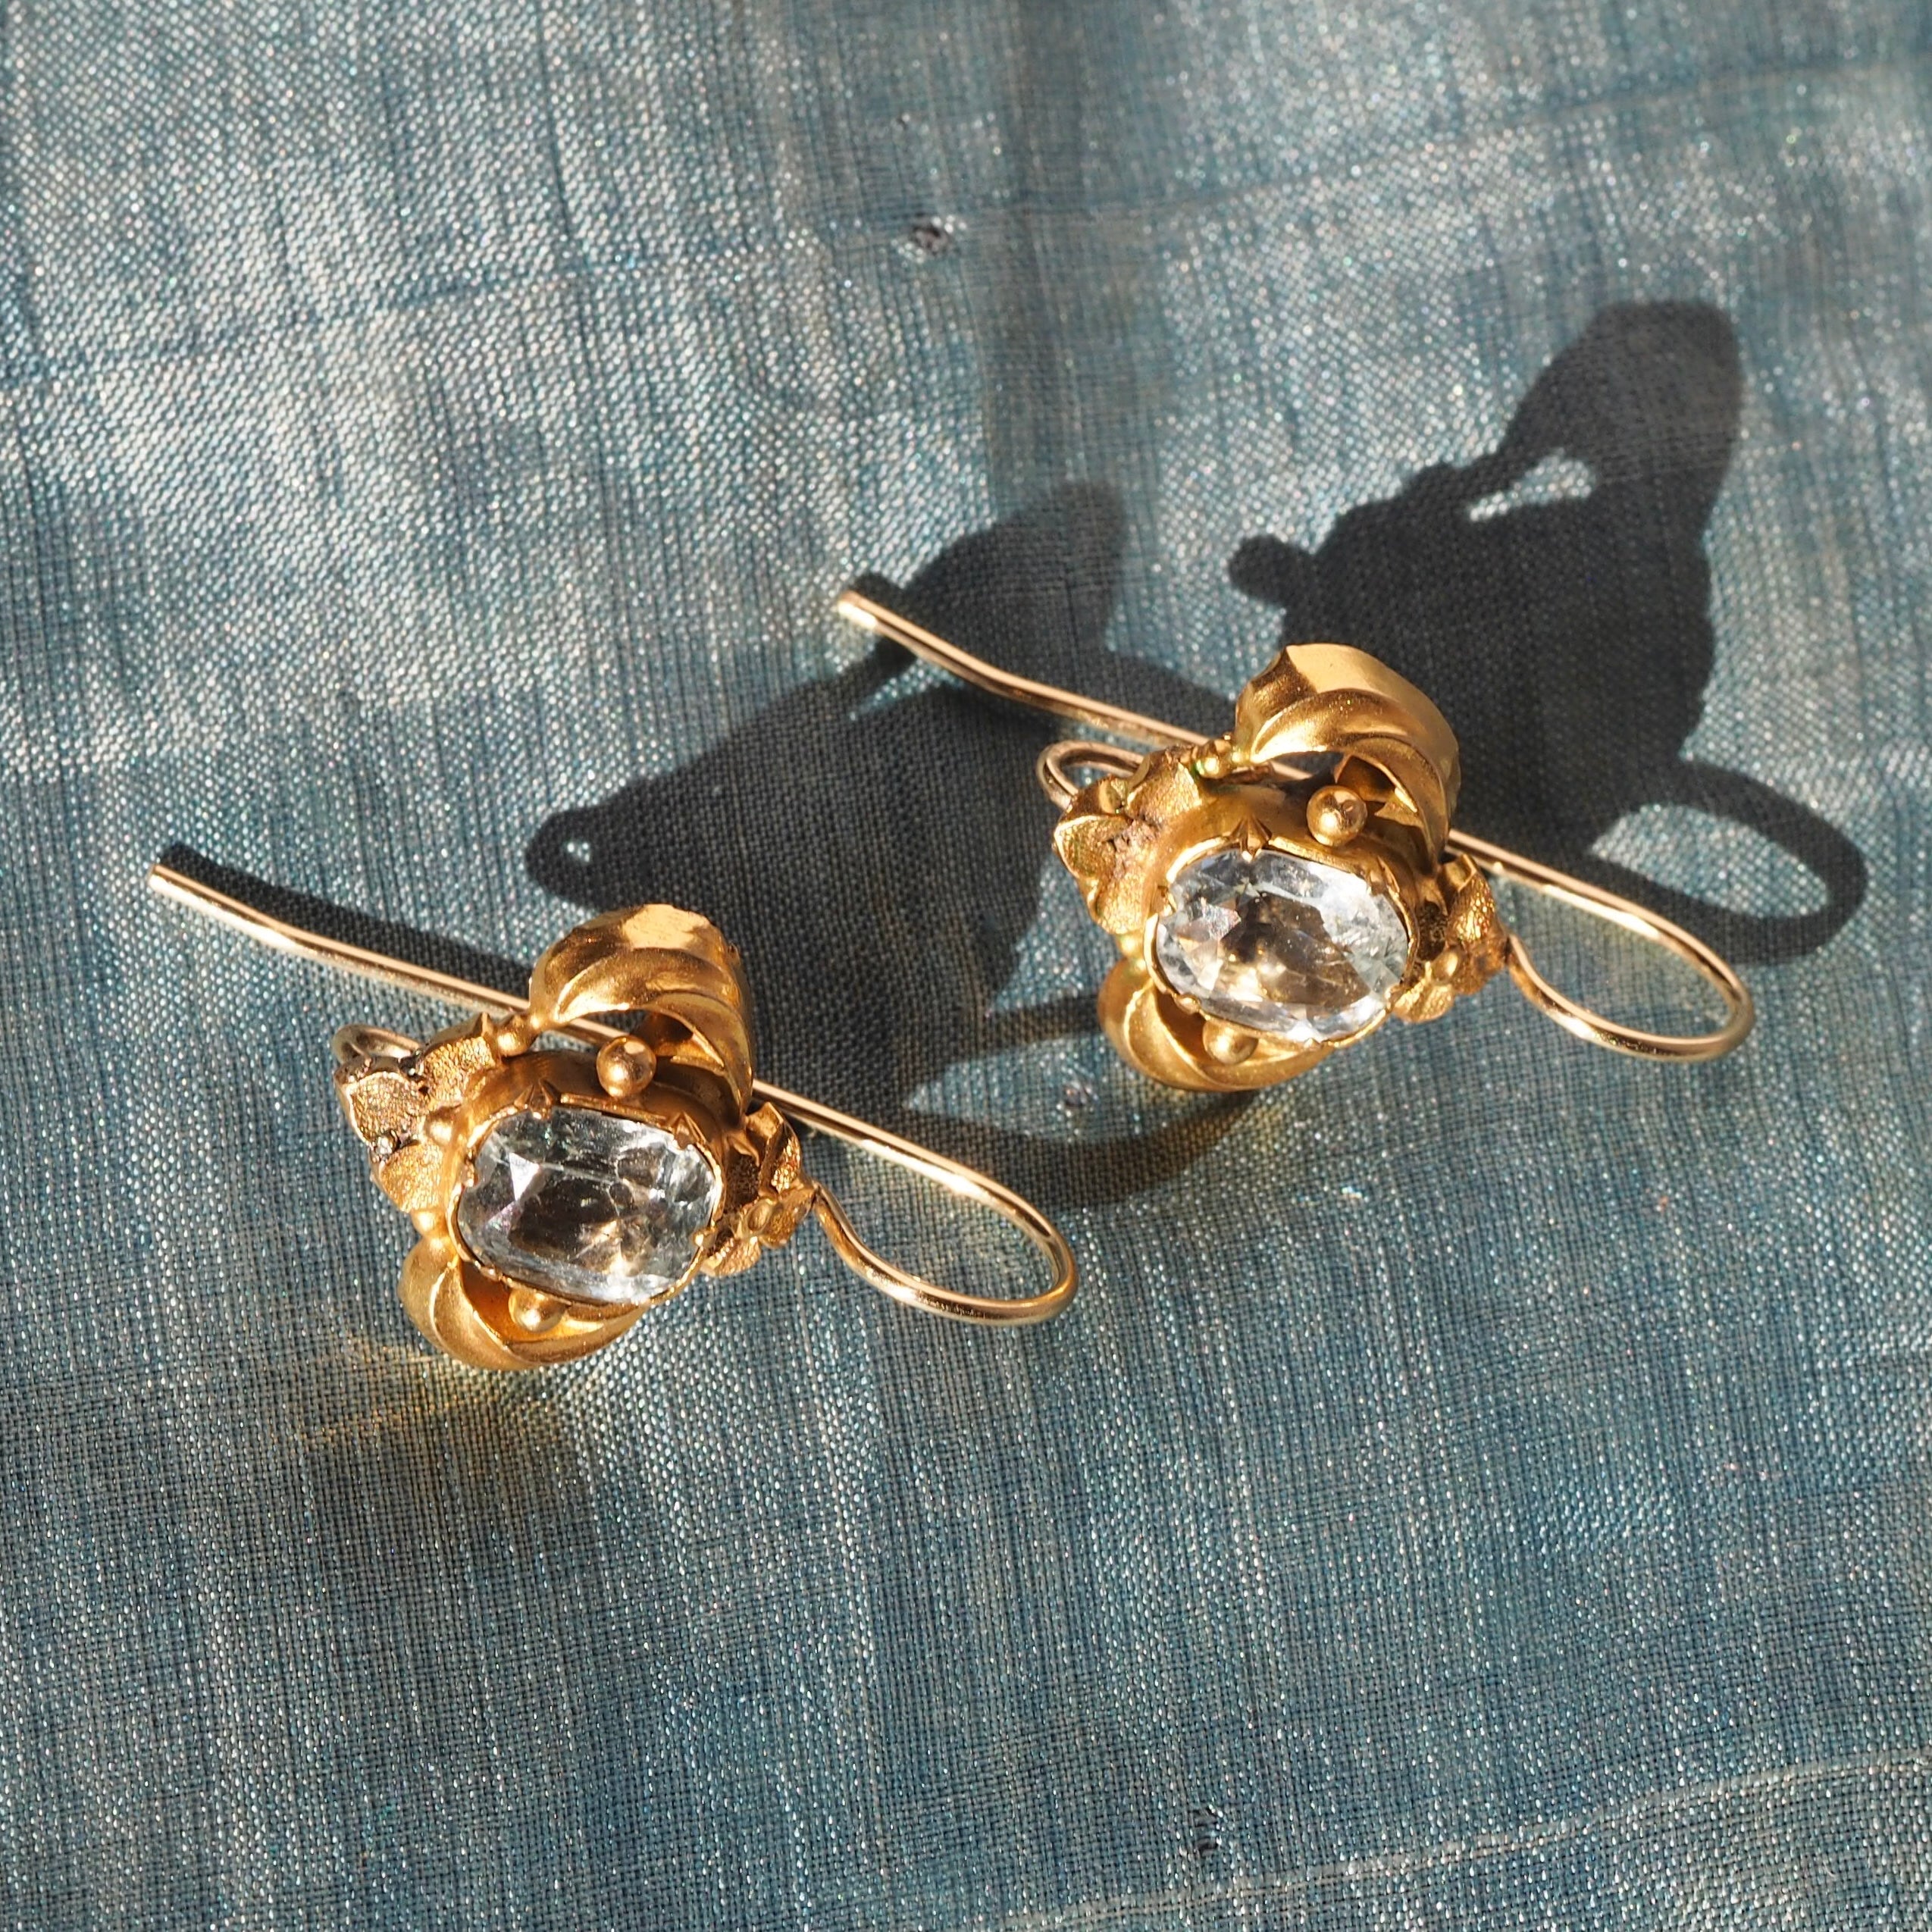 14k Real Yellow GOLD and DIAMOND Cluster Antique style Leverback Dangle  Earrings | eBay